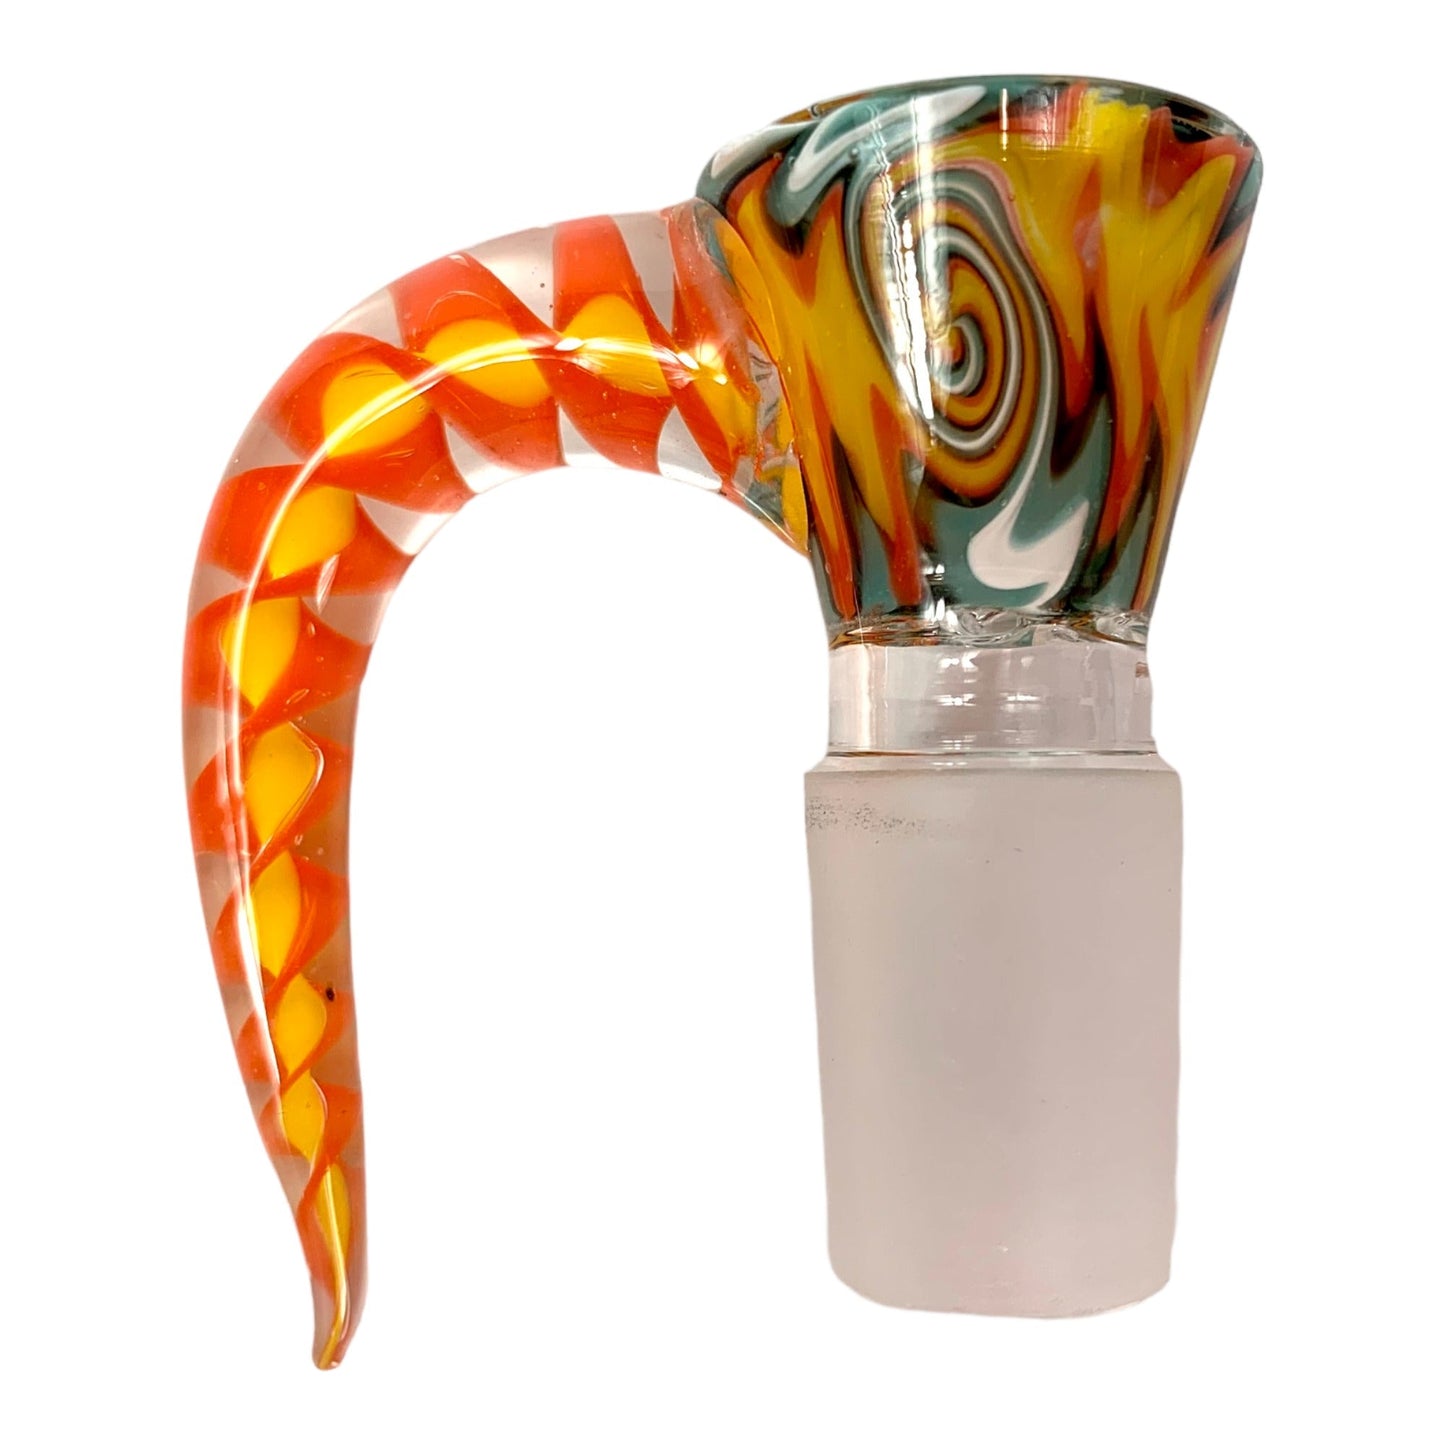 18mm Wig Wam Cone Piece - 4 Hole Glass Filter - Yellow and Red - The Bong Baron